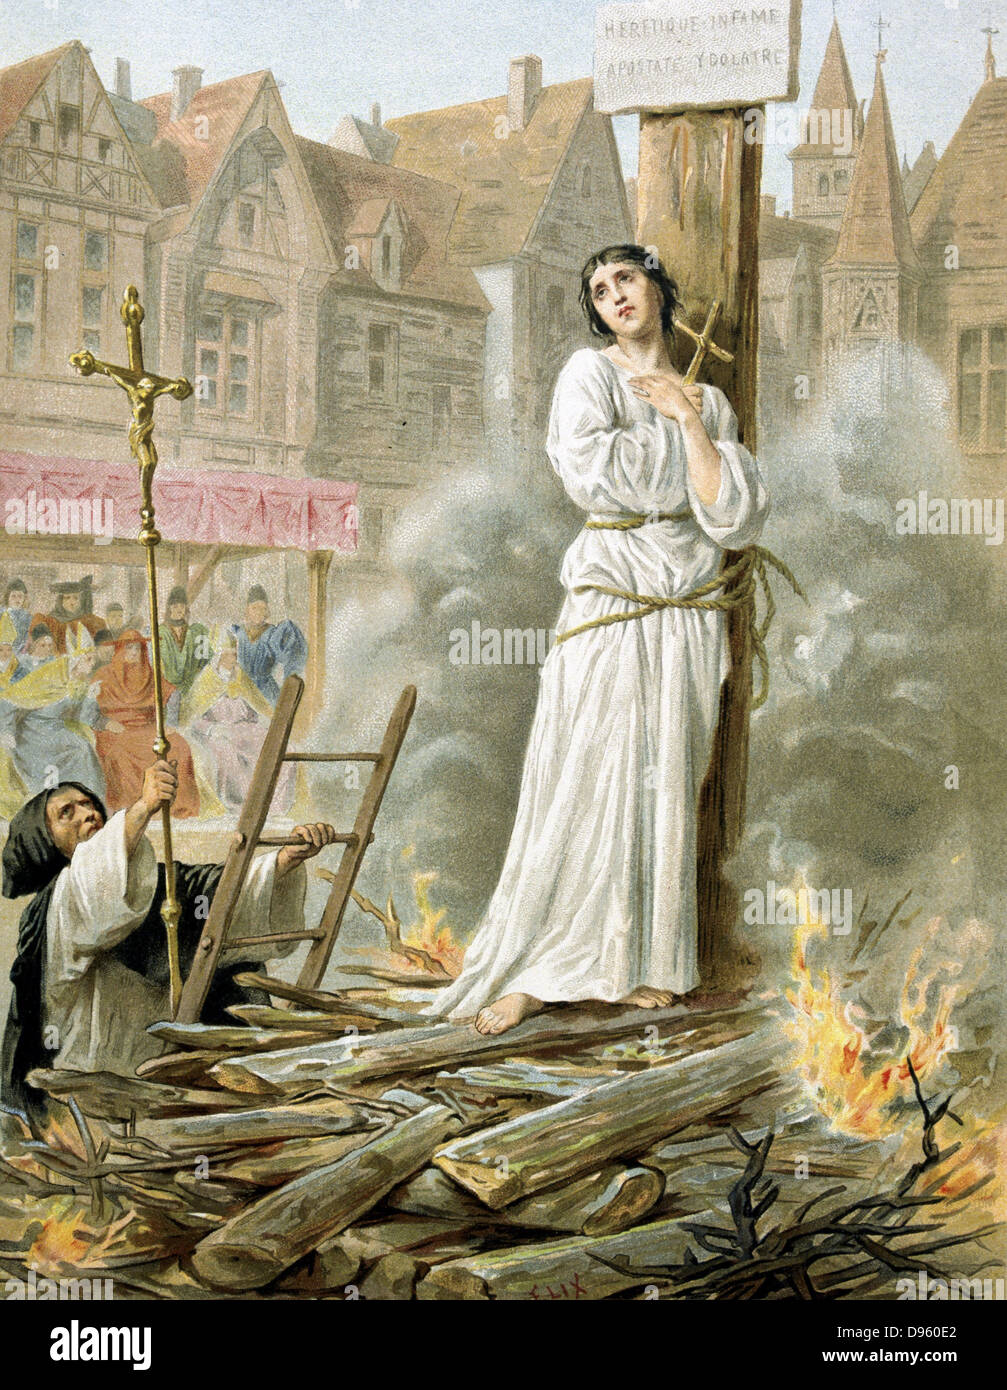 Joan of Arc (c1412-31) St Jeanne d'Arc, the Maid of Orleans, French patriot and martyr. Tried for heresy and sorcery and burnt at stake in market place at Rouen, 30 May 1431. 19th century chromolithograph. Stock Photo